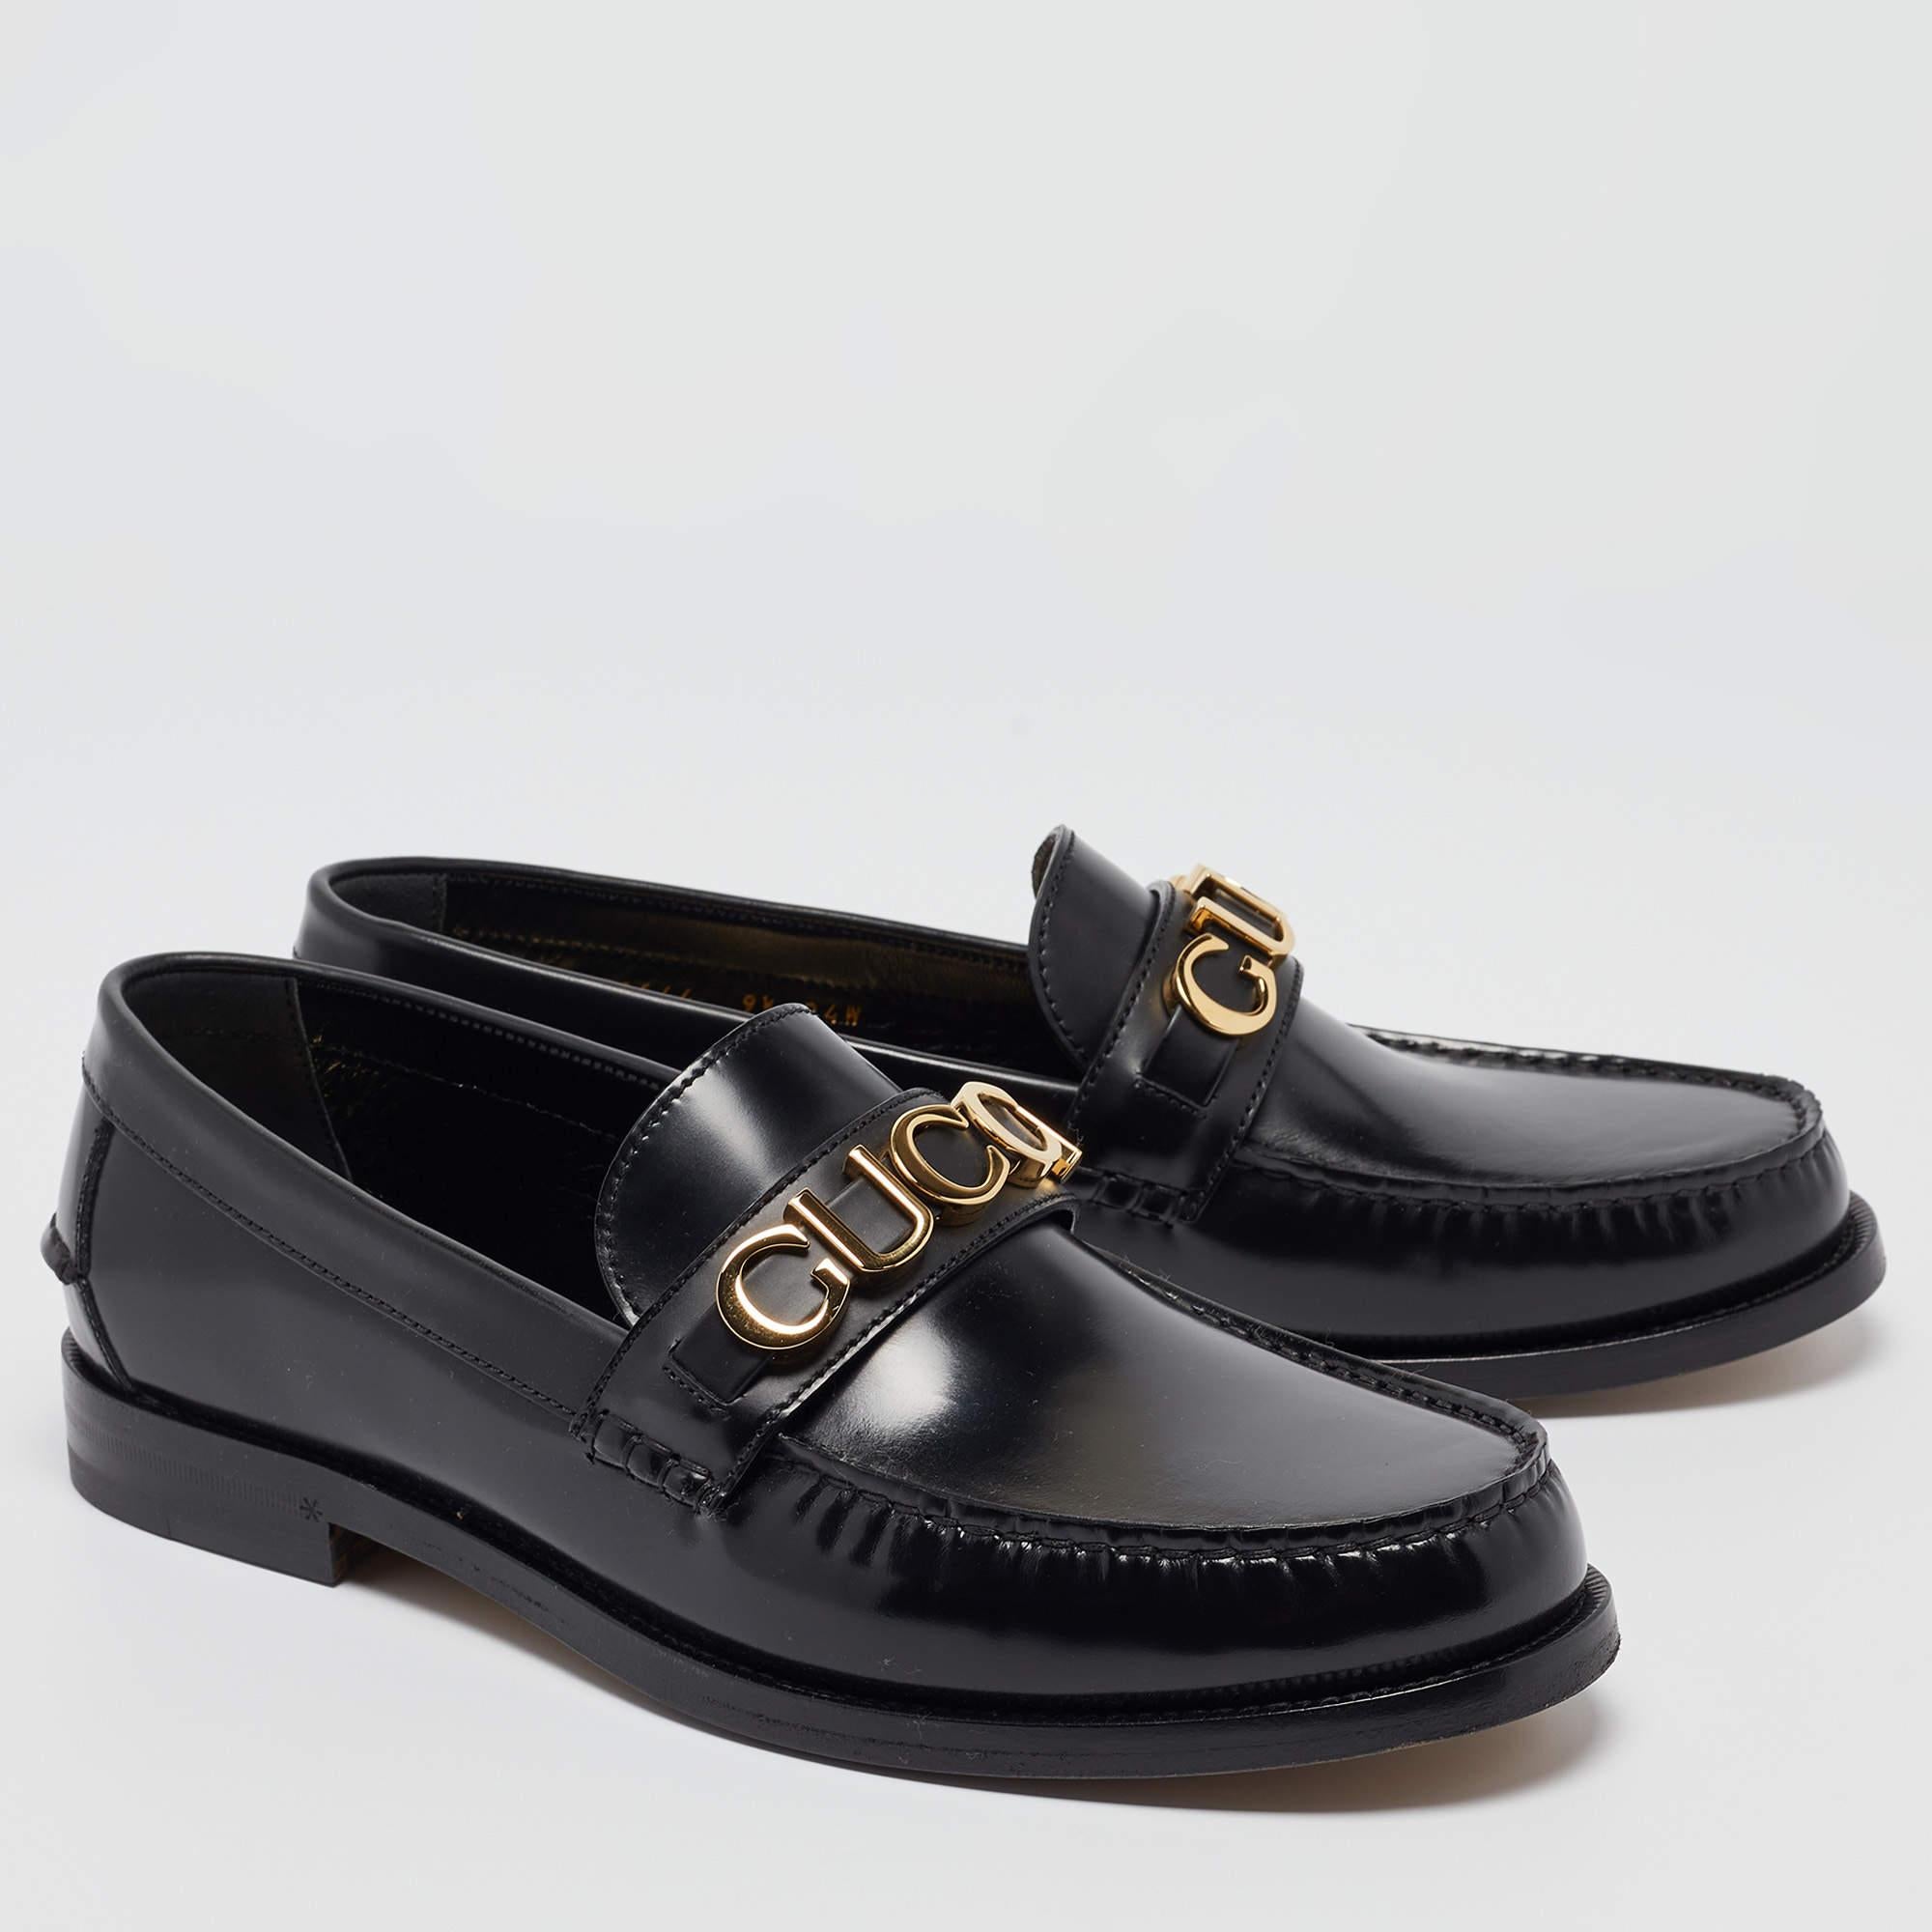 Gucci Black Leather Logo Embellished Cara Loafers Size 43.5 In New Condition For Sale In Dubai, Al Qouz 2